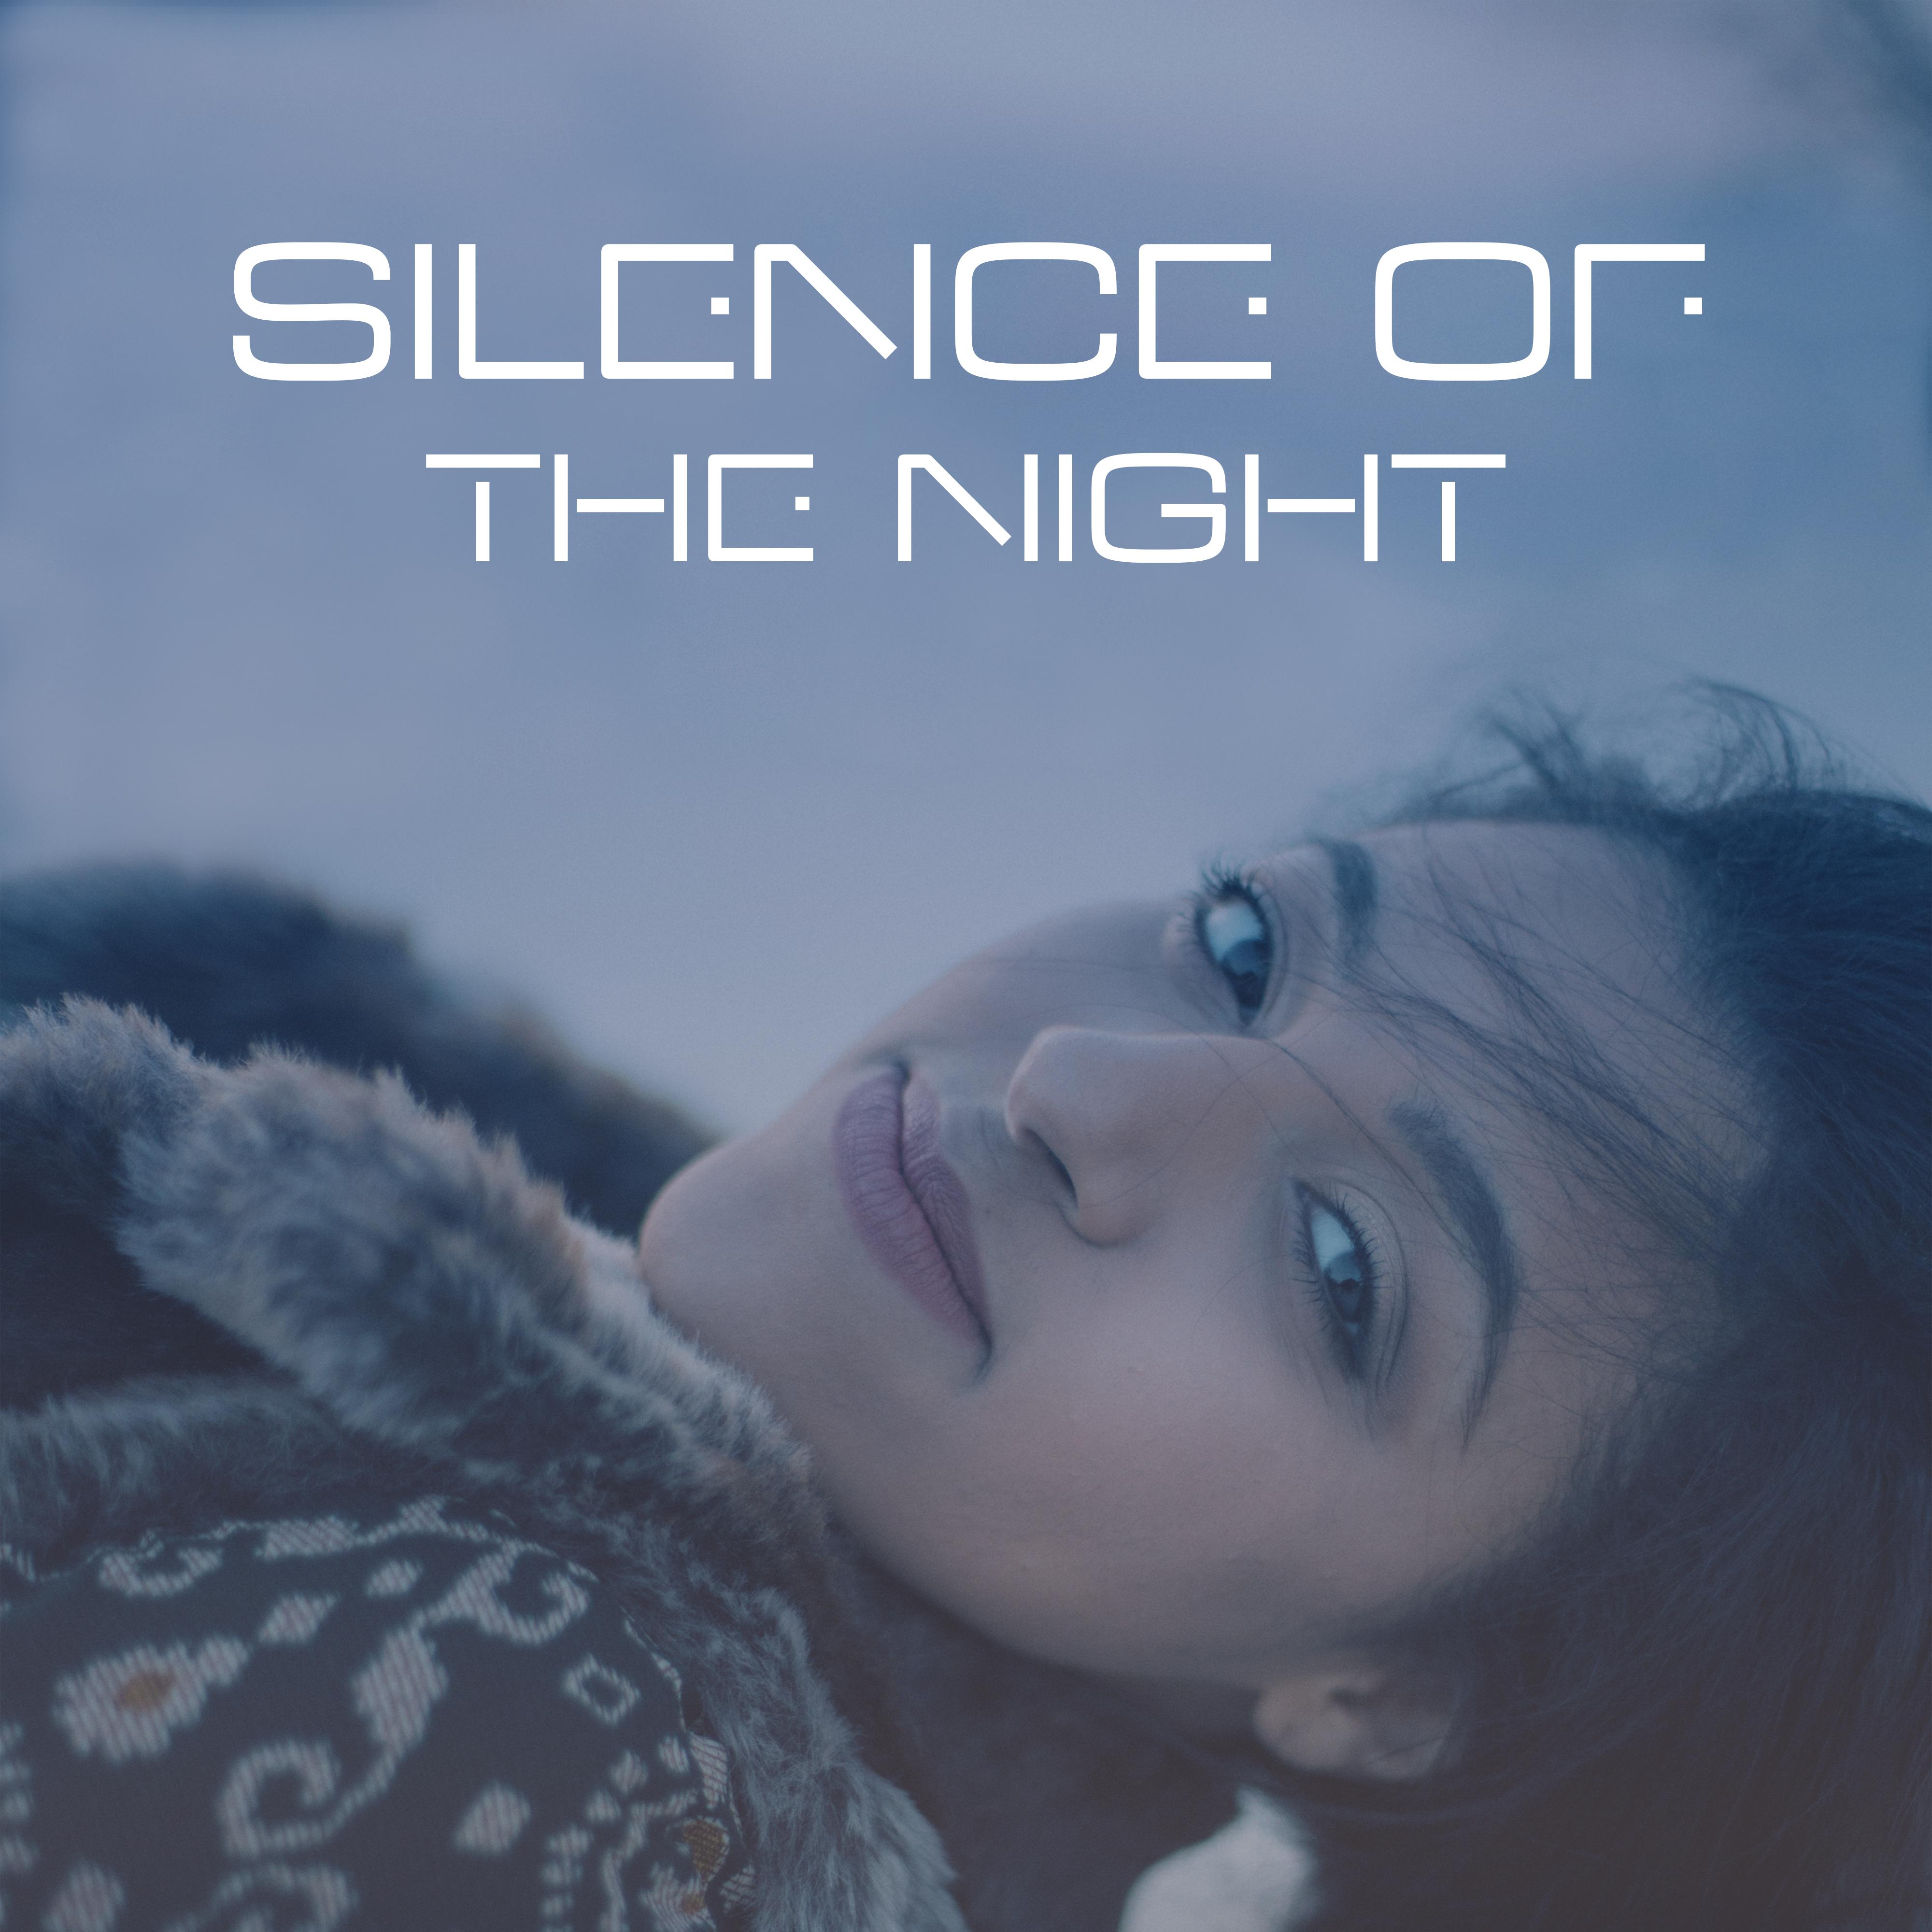 Silence of the Night - Soft Pillow, Warm Blanket, Relaxing Time, Nice Well-Being